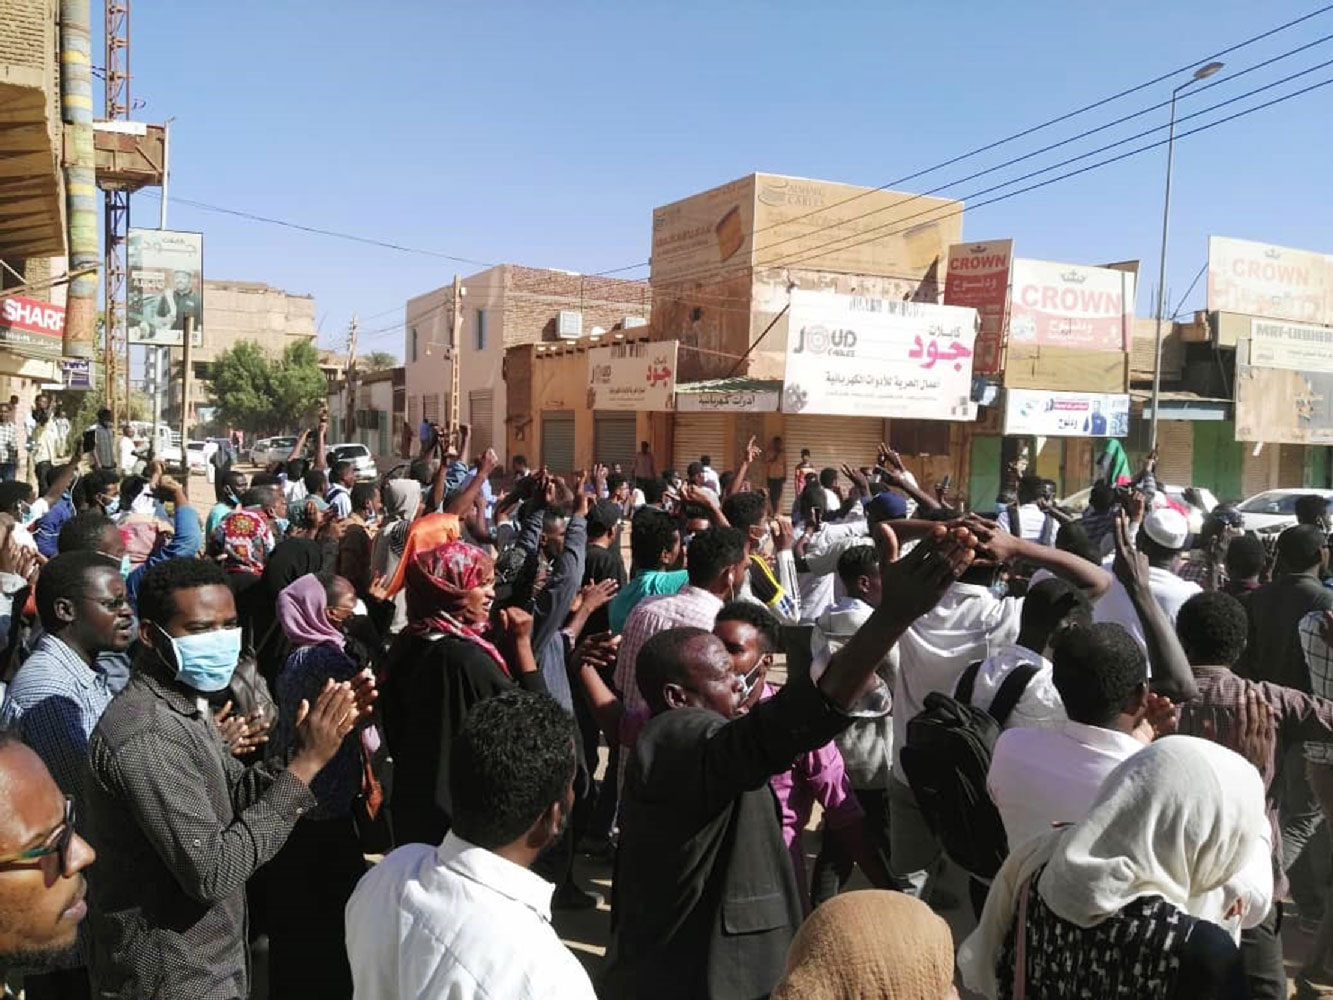 Sudanese protesters chant slogans during an anti-government demonstration in the capital Khartoum on January 6, 2018.